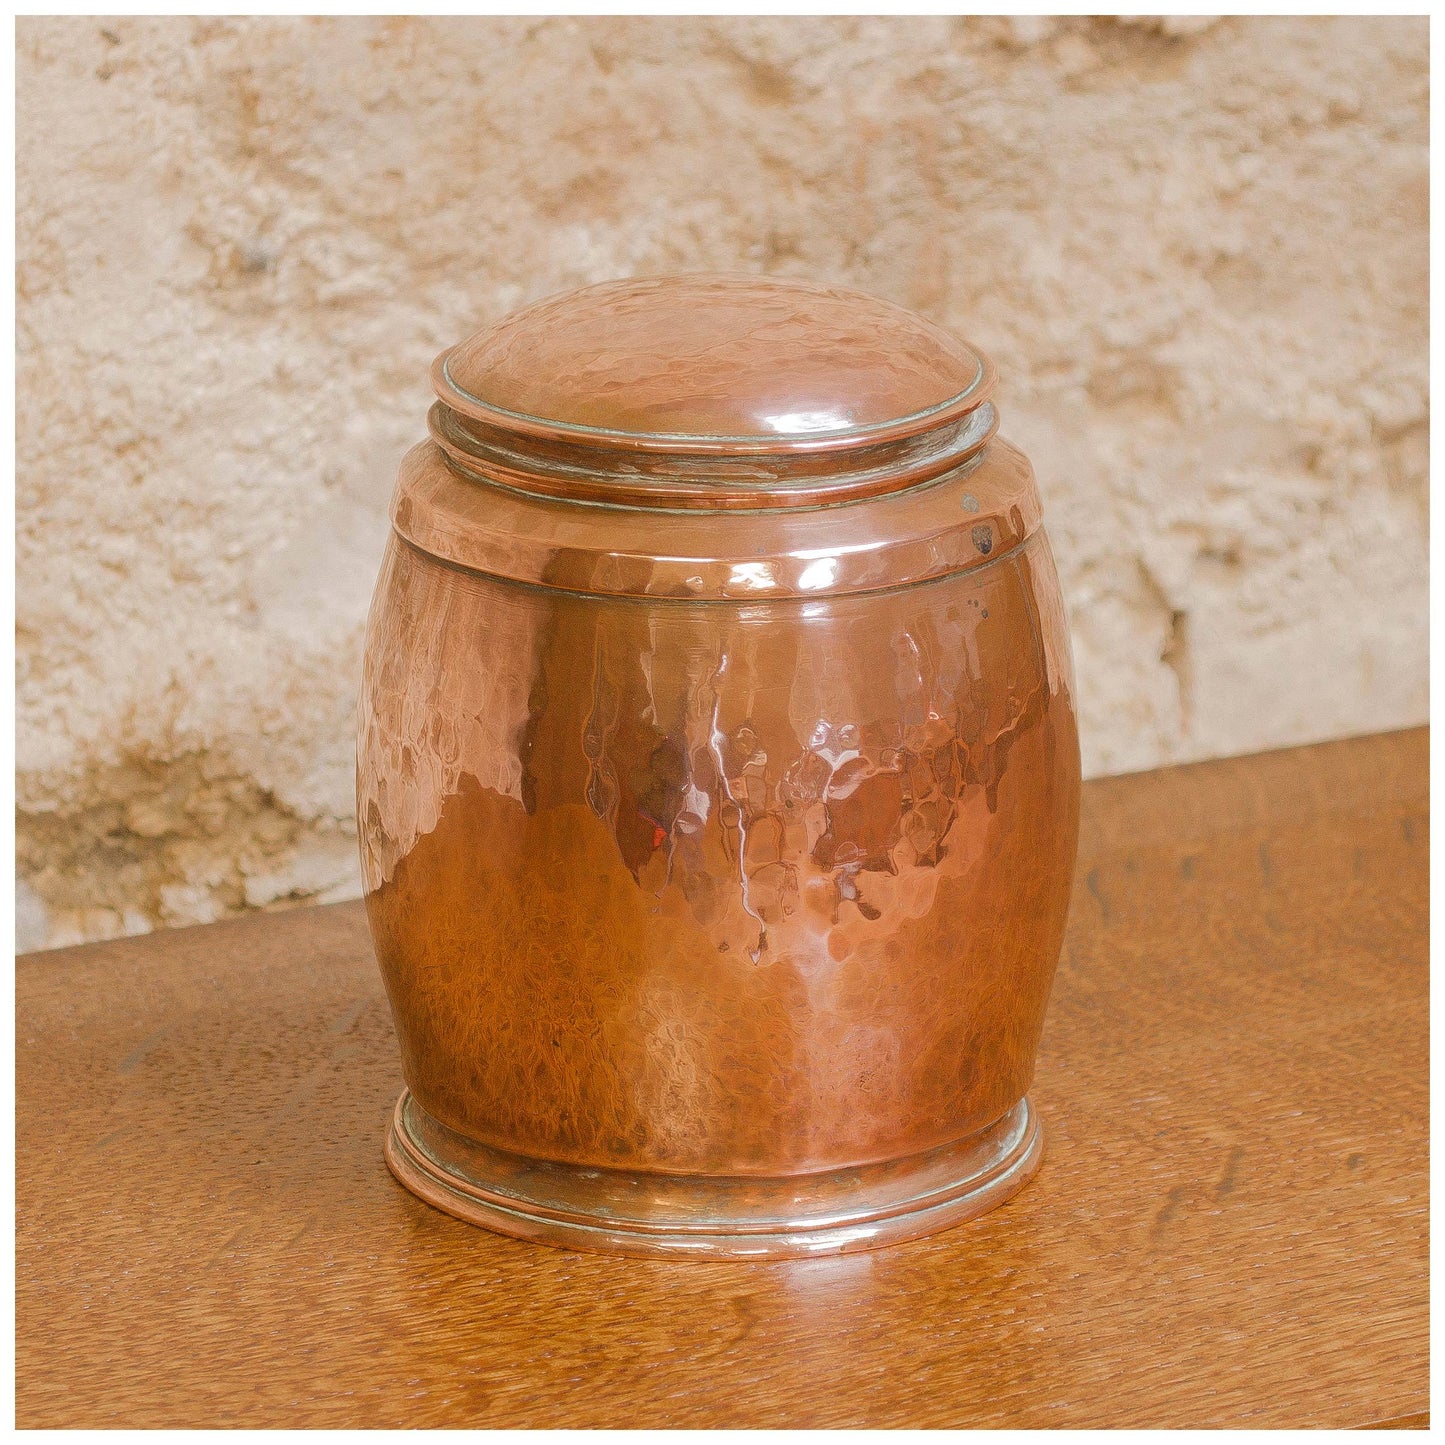 An Arts & Crafts Lakes School hand beaten copper jar by Fanny Carter